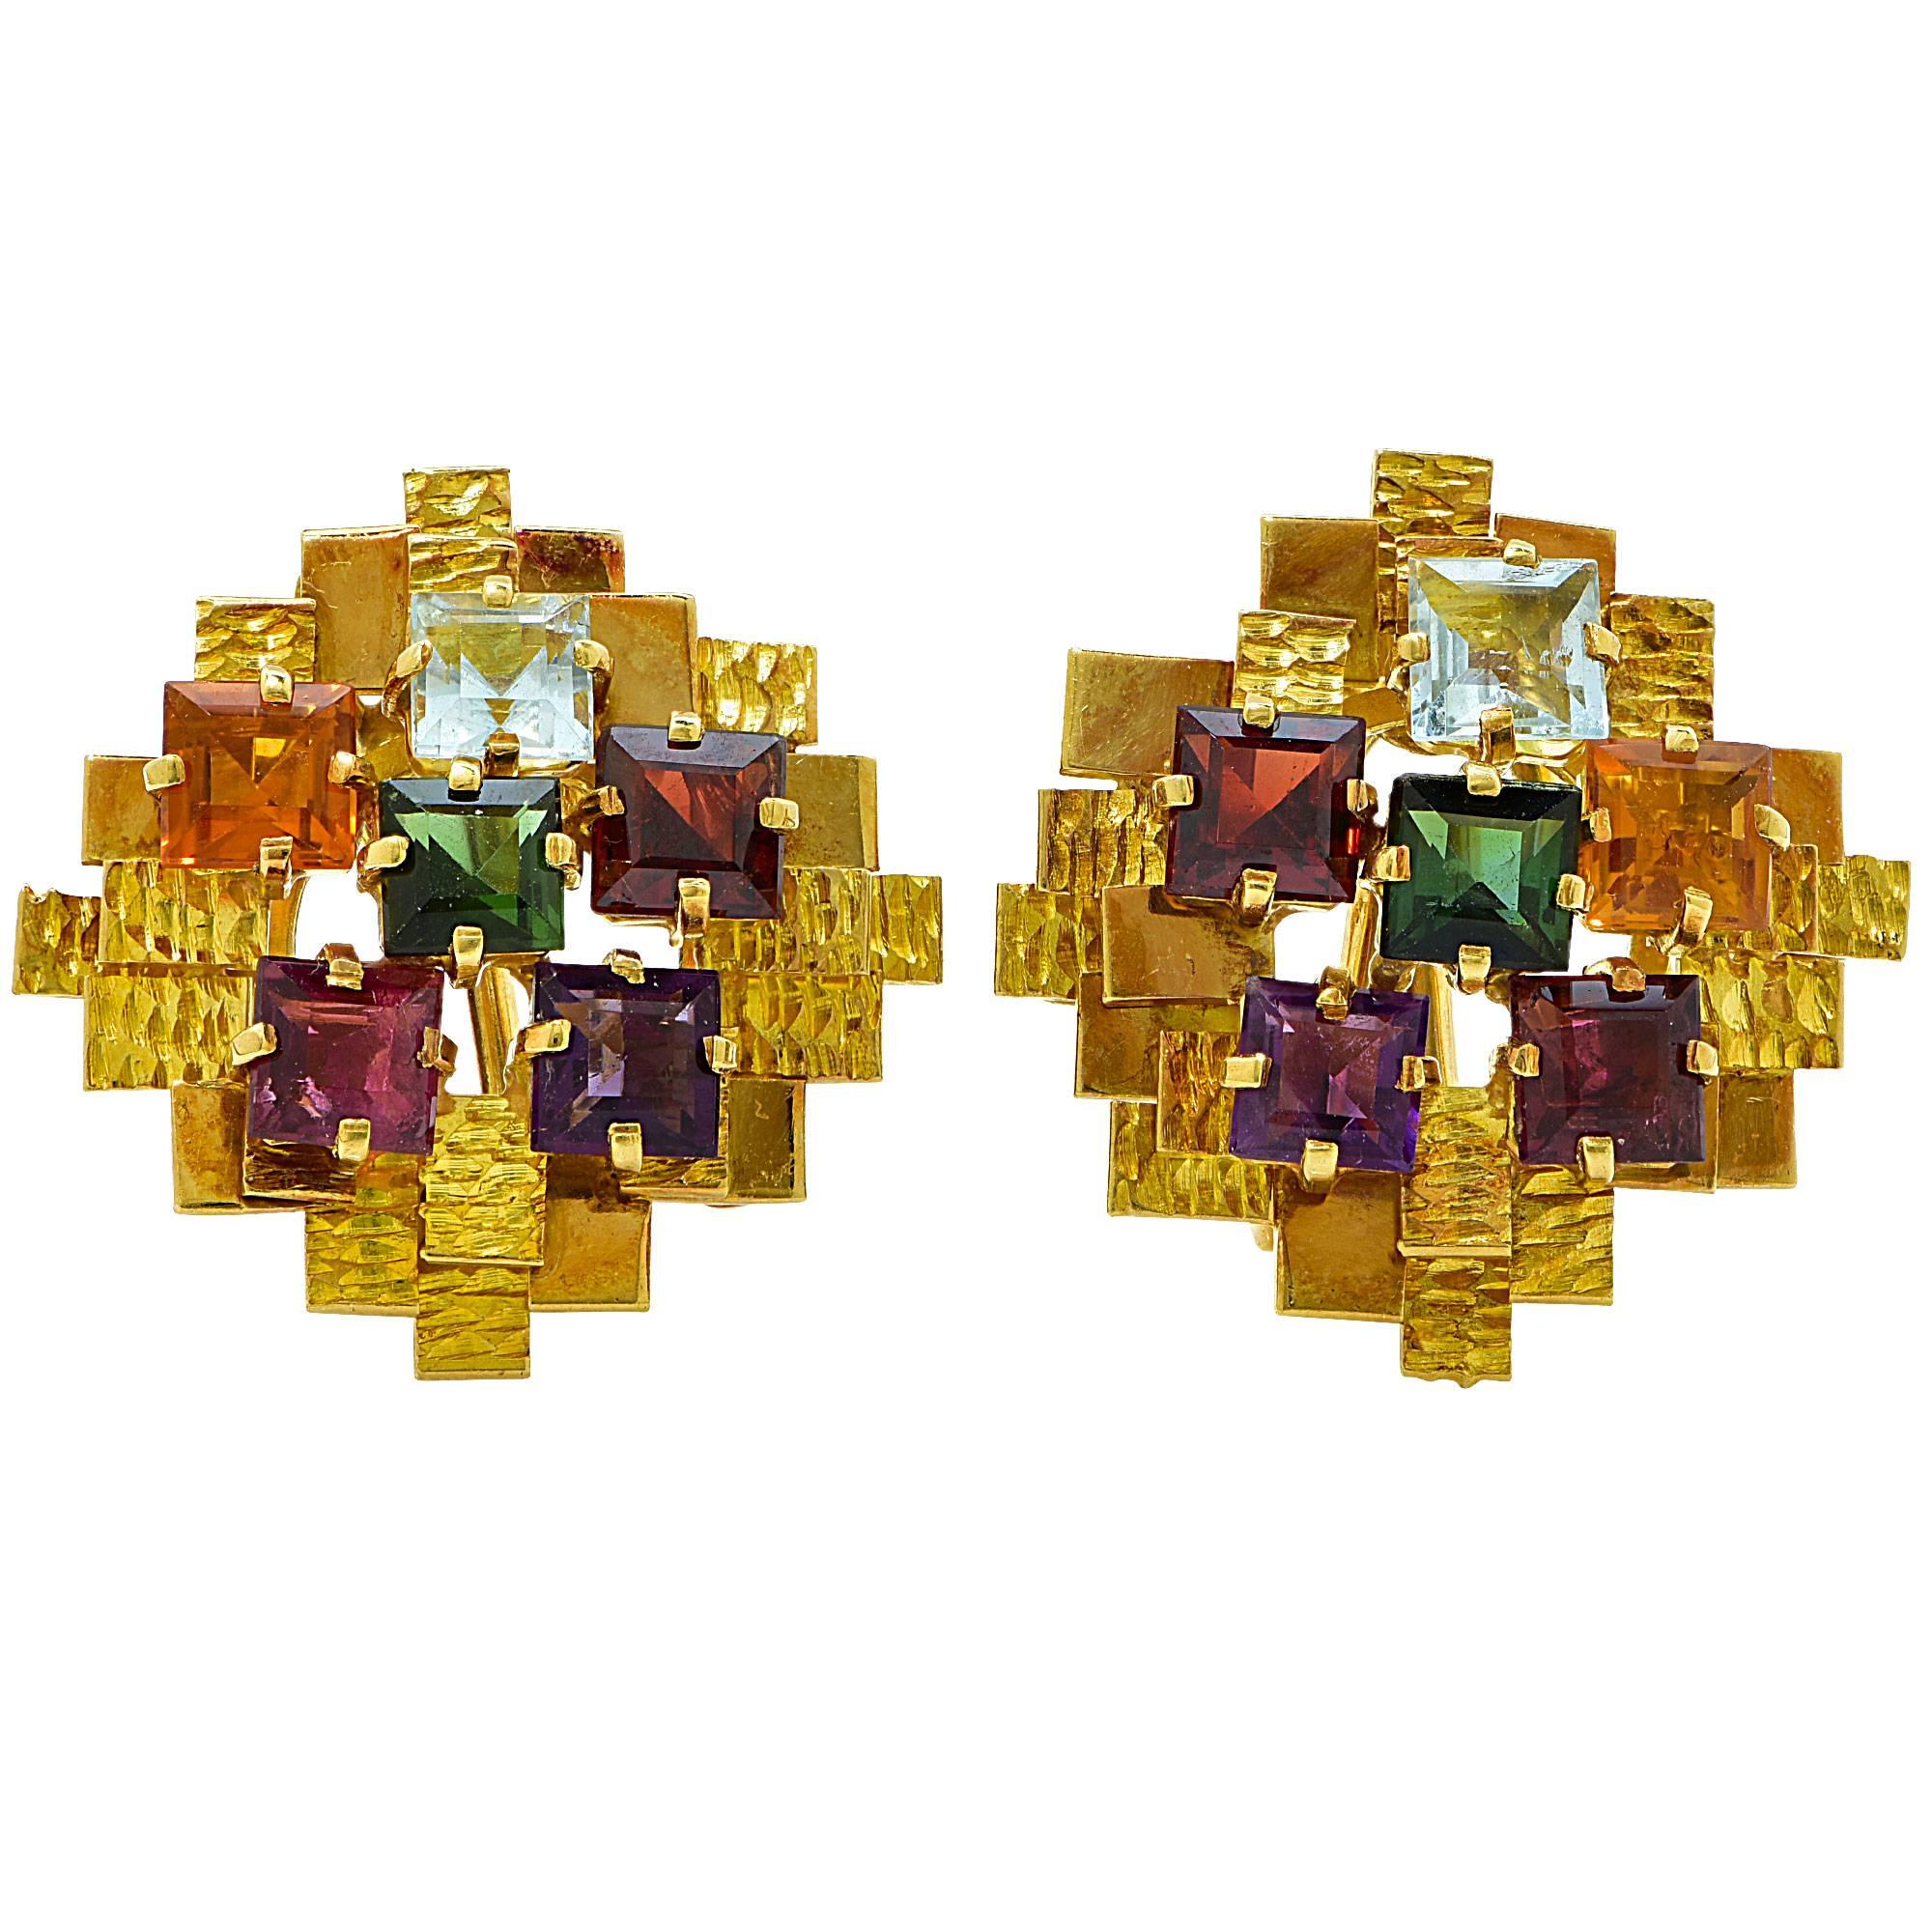 18k yellow gold dimensional earrings and brooch set containing a mixed variety of vibrant Tourmaline and quartz square step cuts.

The earrings measure 25mm by 25mm at the widest points. The brooch measures 39mm by 39mm at the widest point.
The